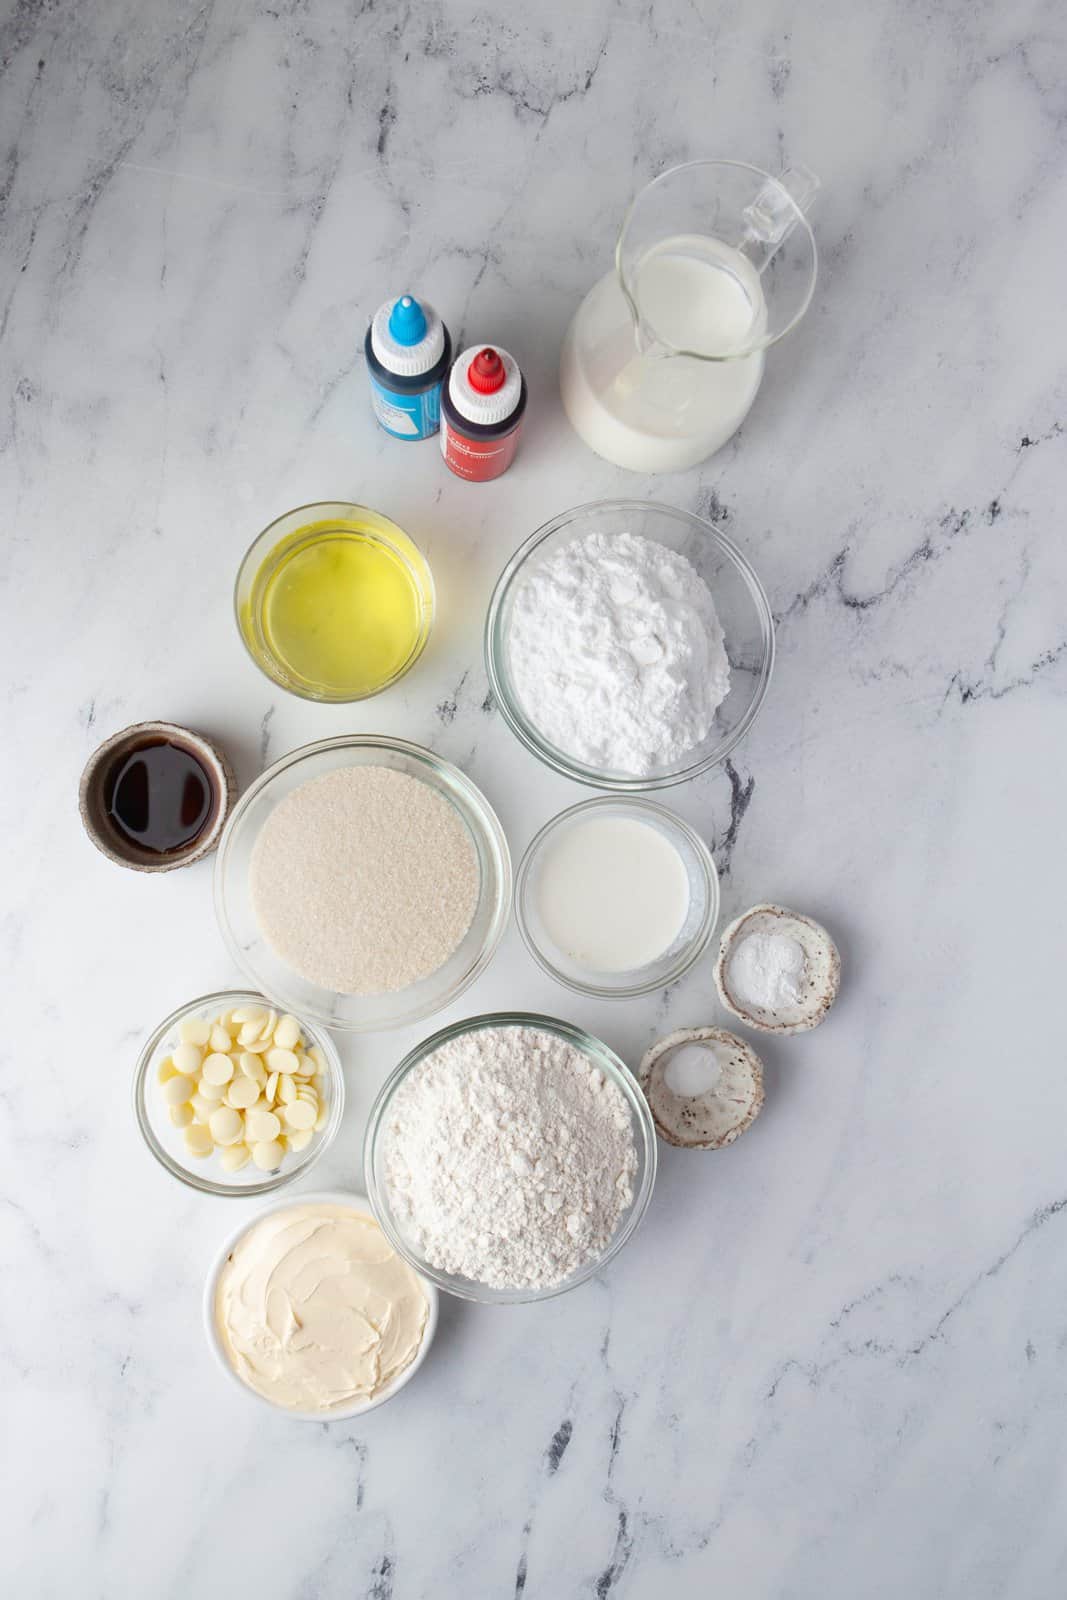 Ingredients needed: butter, granulated sugar, egg whites, baking powder, baking soda, all-purpose flour, vanilla, milk, white chocolate, powdered sugar, whipping cream and food coloring.